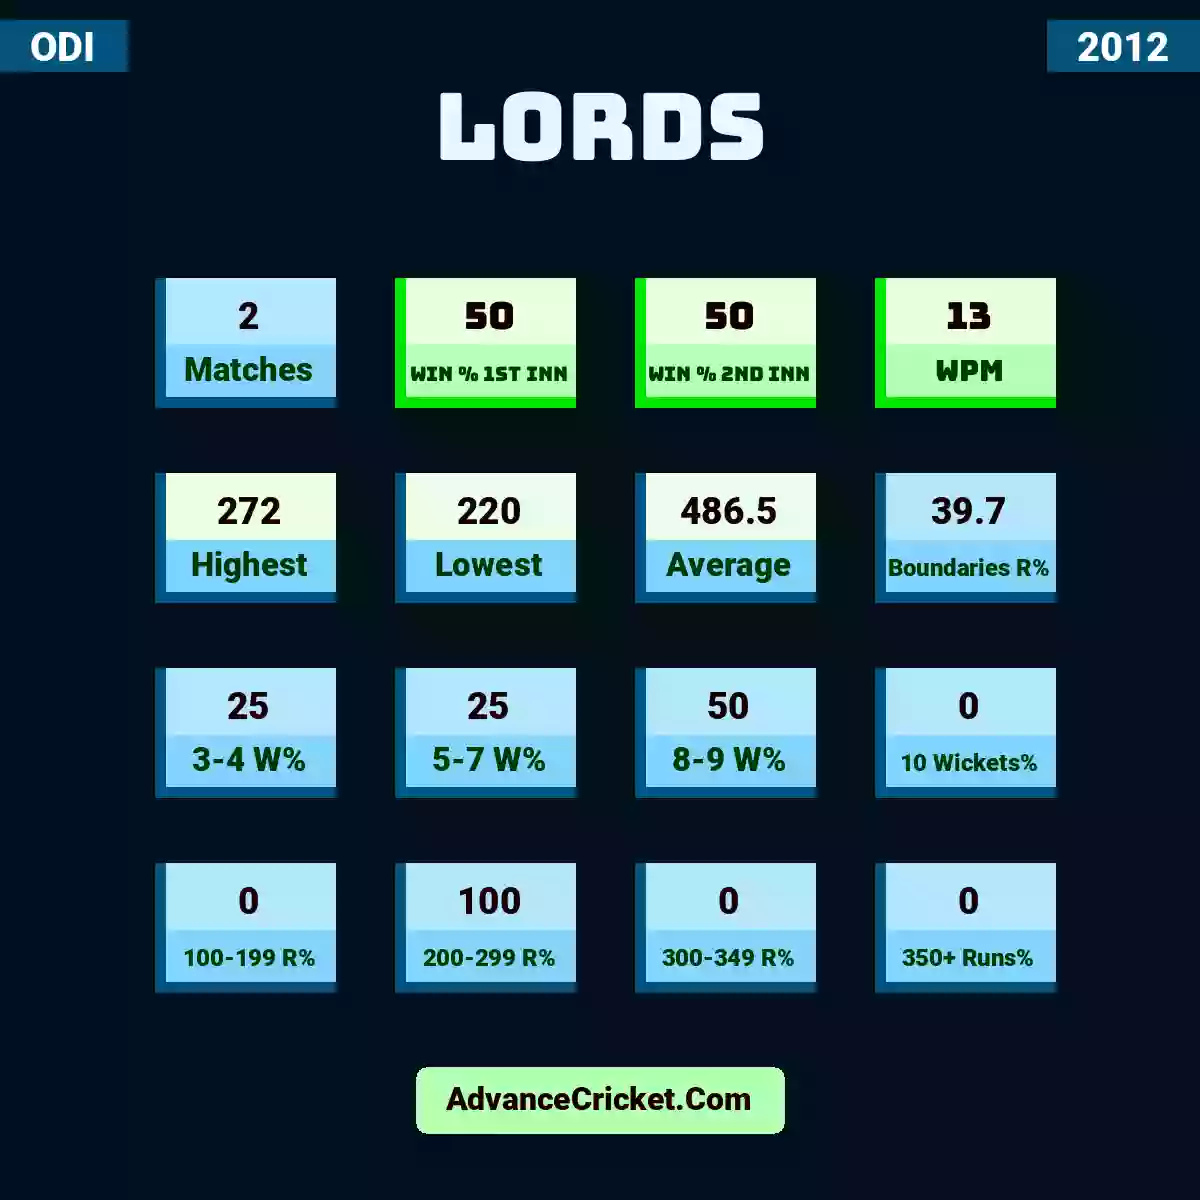 Image showing Lords with Matches: 2, Win % 1st Inn: 50, Win % 2nd Inn: 50, WPM: 13, Highest: 272, Lowest: 220, Average: 486.5, Boundaries R%: 39.7, 3-4 W%: 25, 5-7 W%: 25, 8-9 W%: 50, 10 Wickets%: 0, 100-199 R%: 0, 200-299 R%: 100, 300-349 R%: 0, 350+ Runs%: 0.